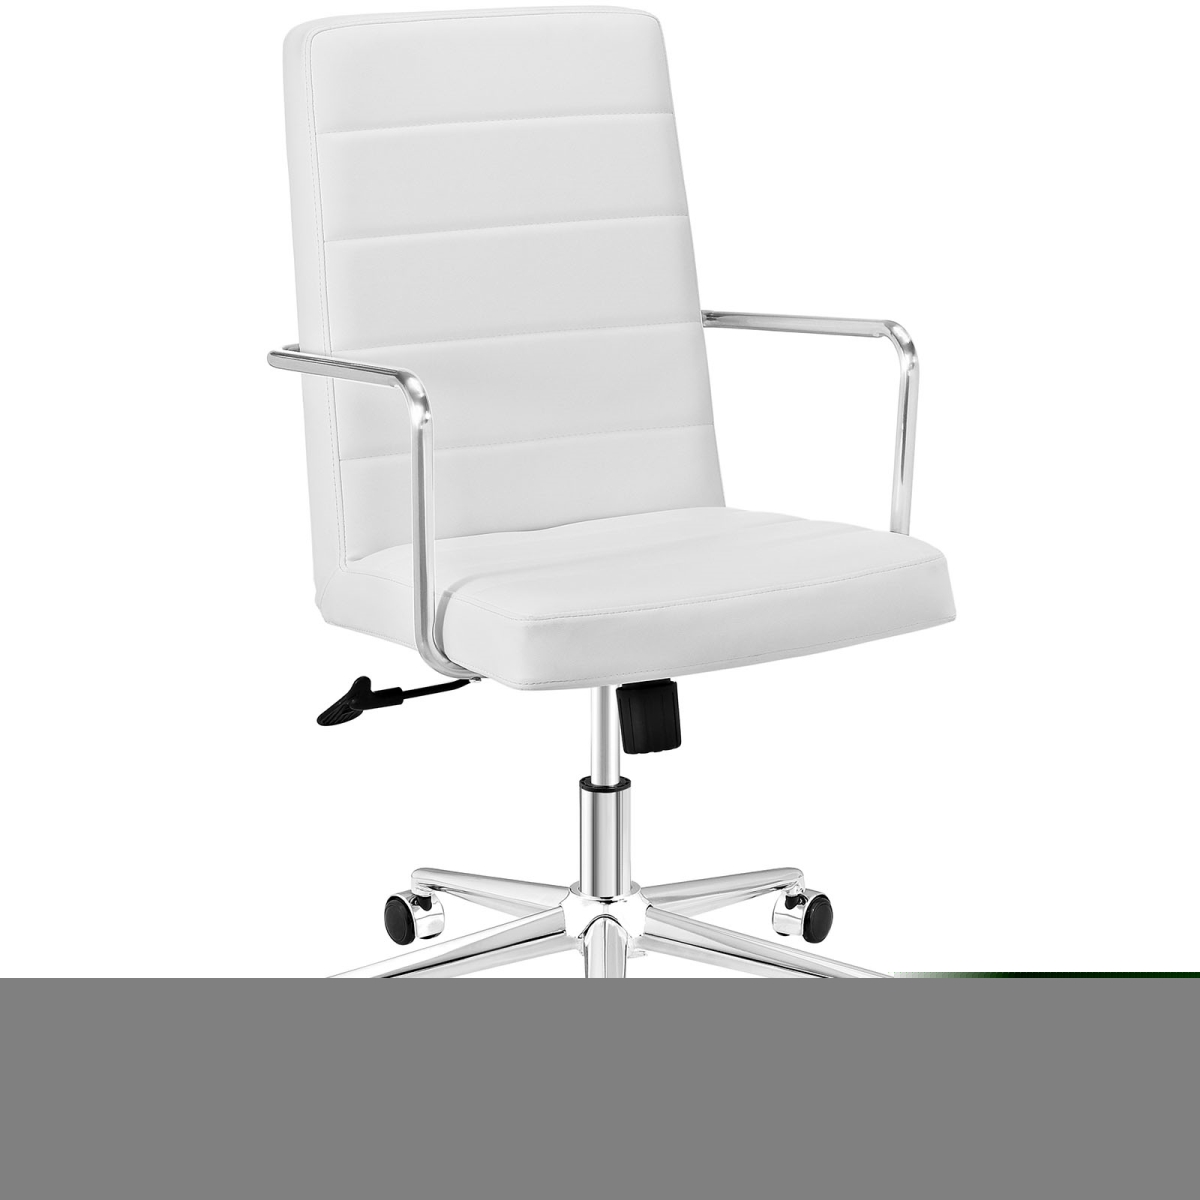 Modway Eei-2124-whi Cavalier Highback Office Chair, White